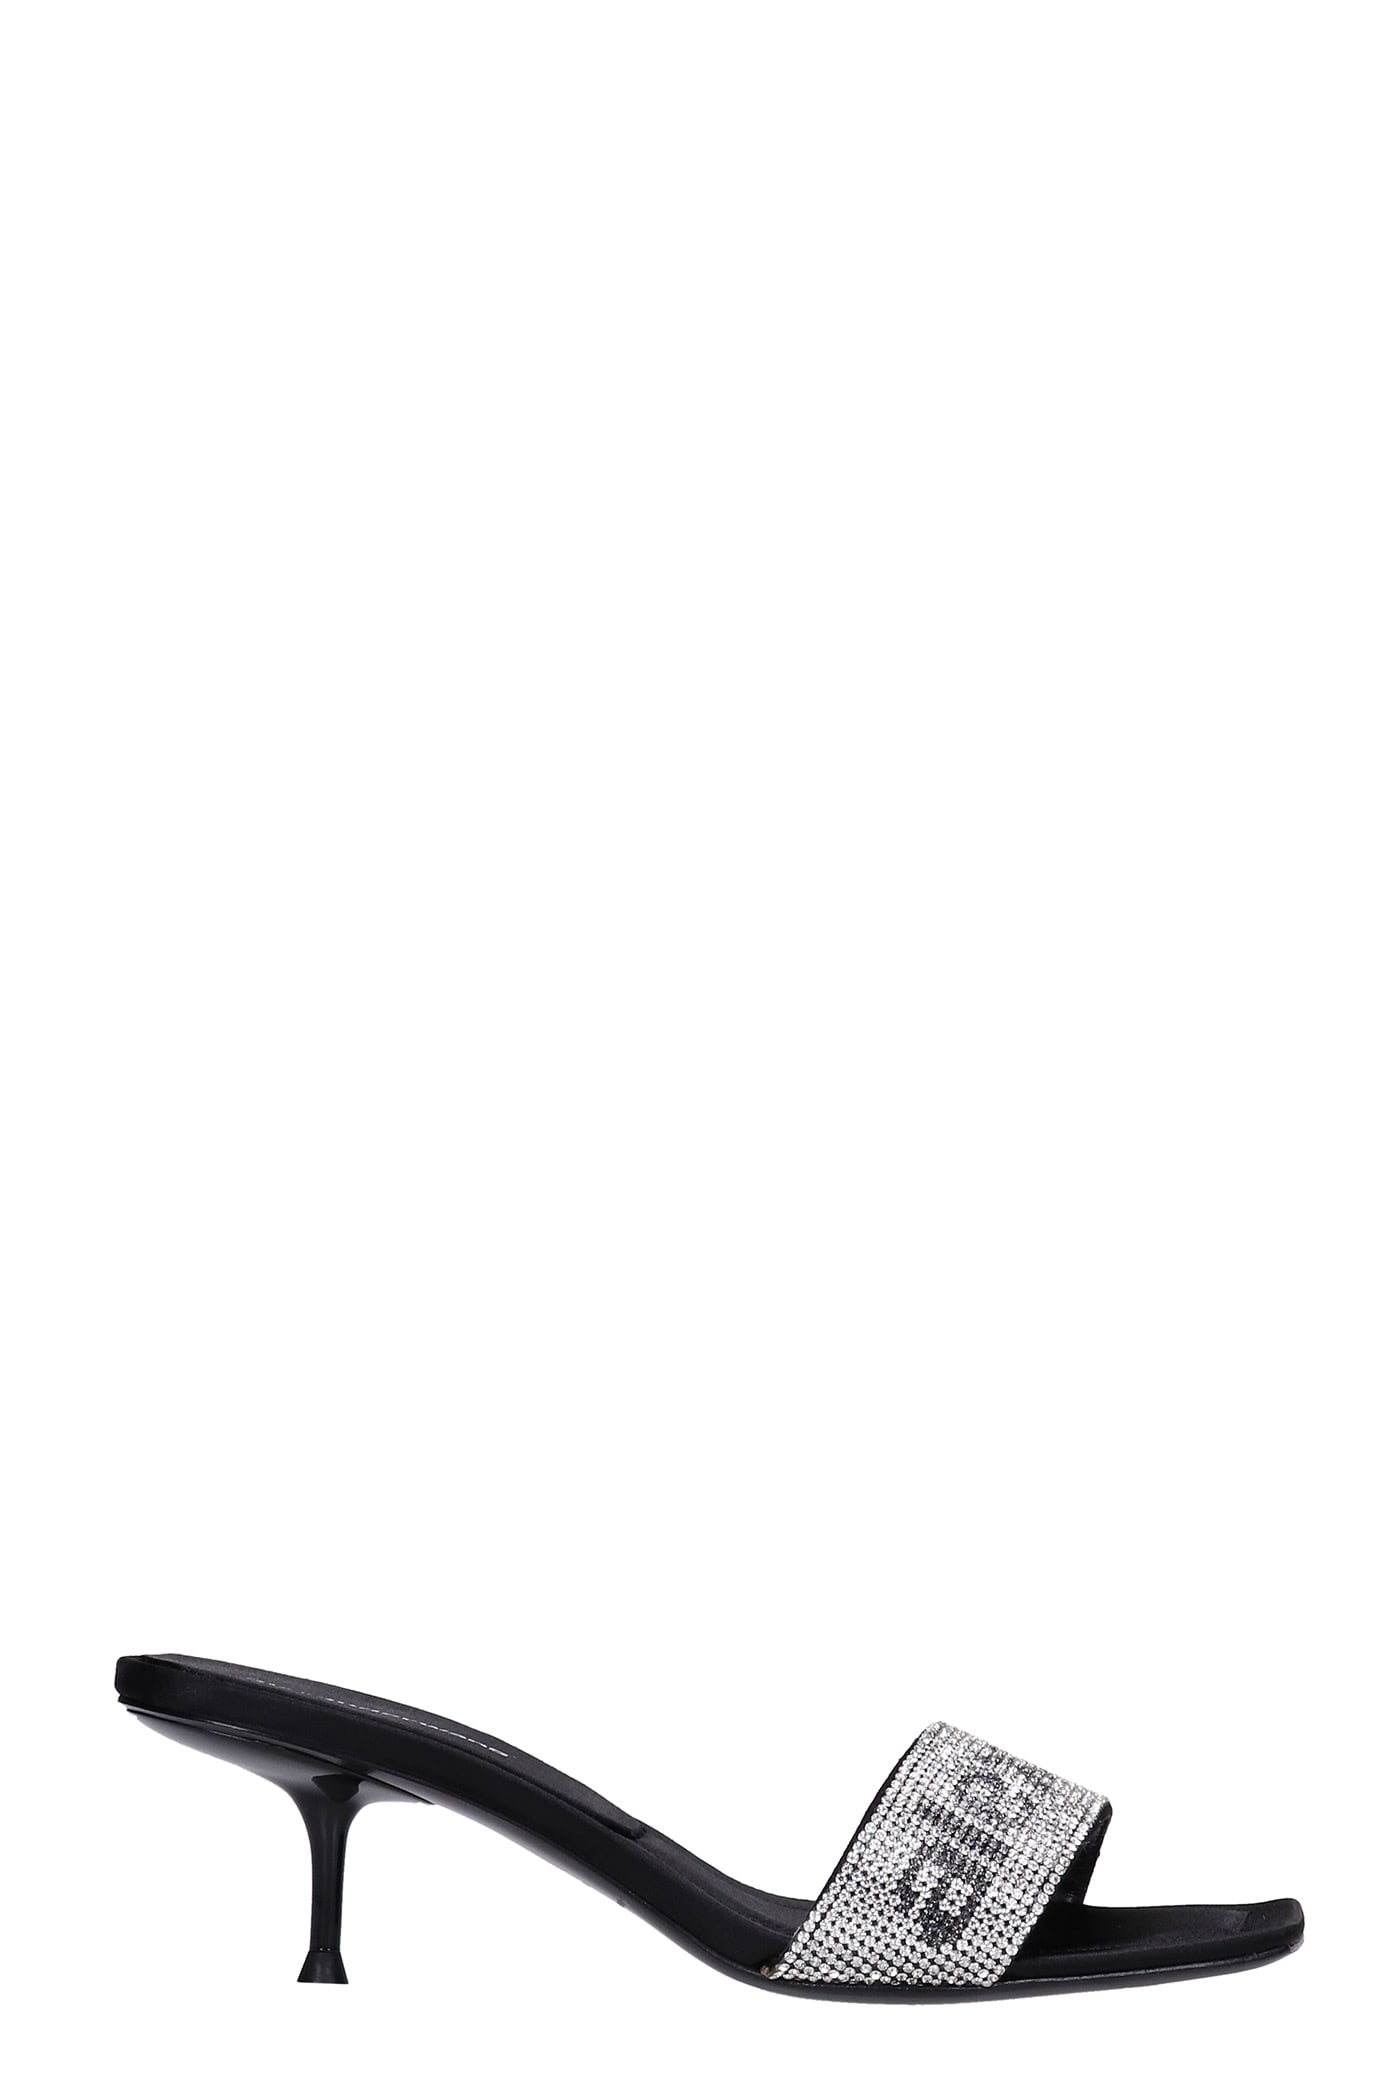 Buy Alexander Wang Jessie Sandals In Black Leather online, shop Alexander Wang shoes with free shipping